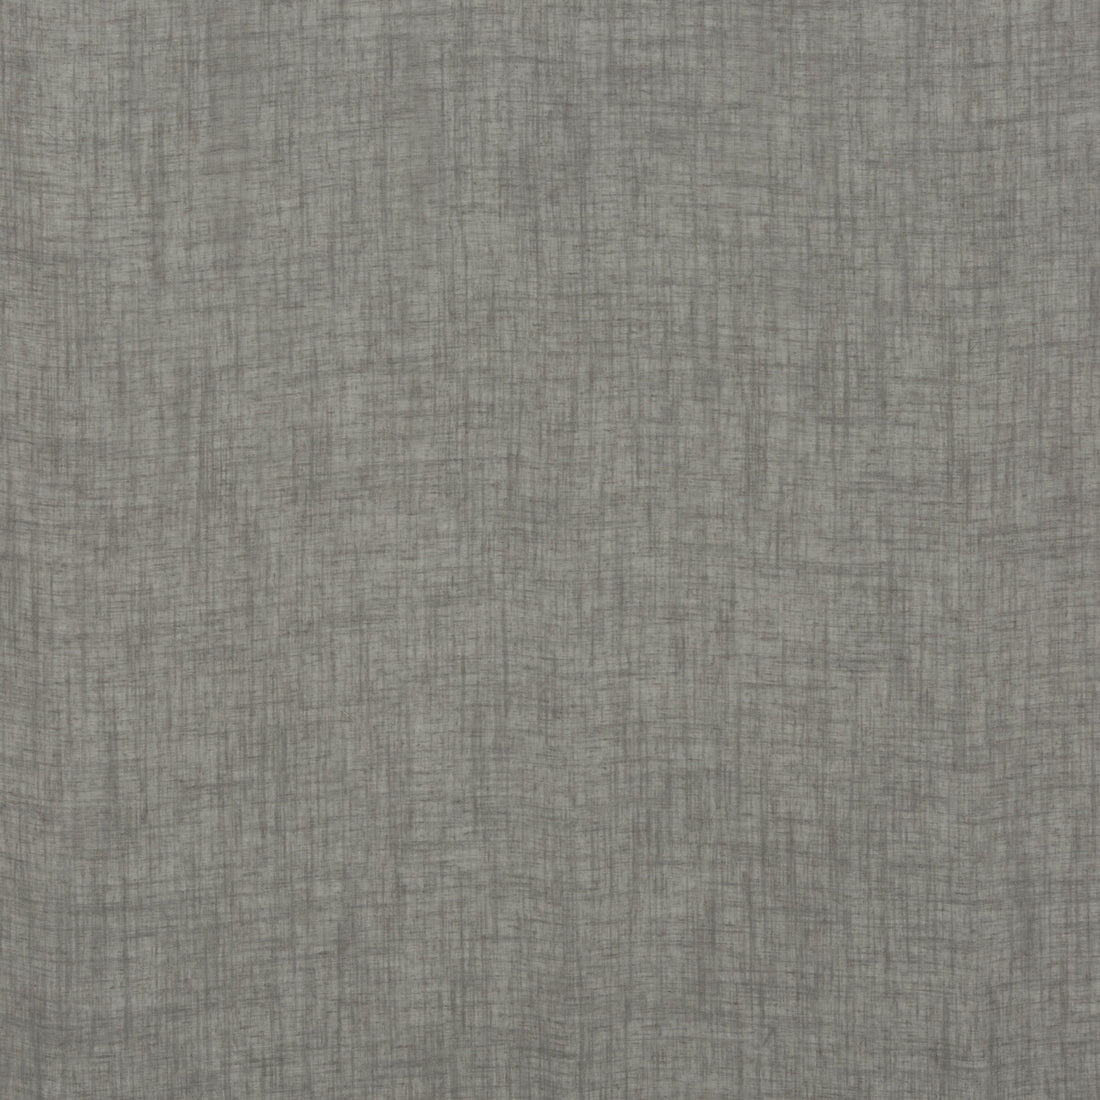 Kelso fabric in graphite color - pattern PV1005.970.0 - by Baker Lifestyle in the Notebooks collection